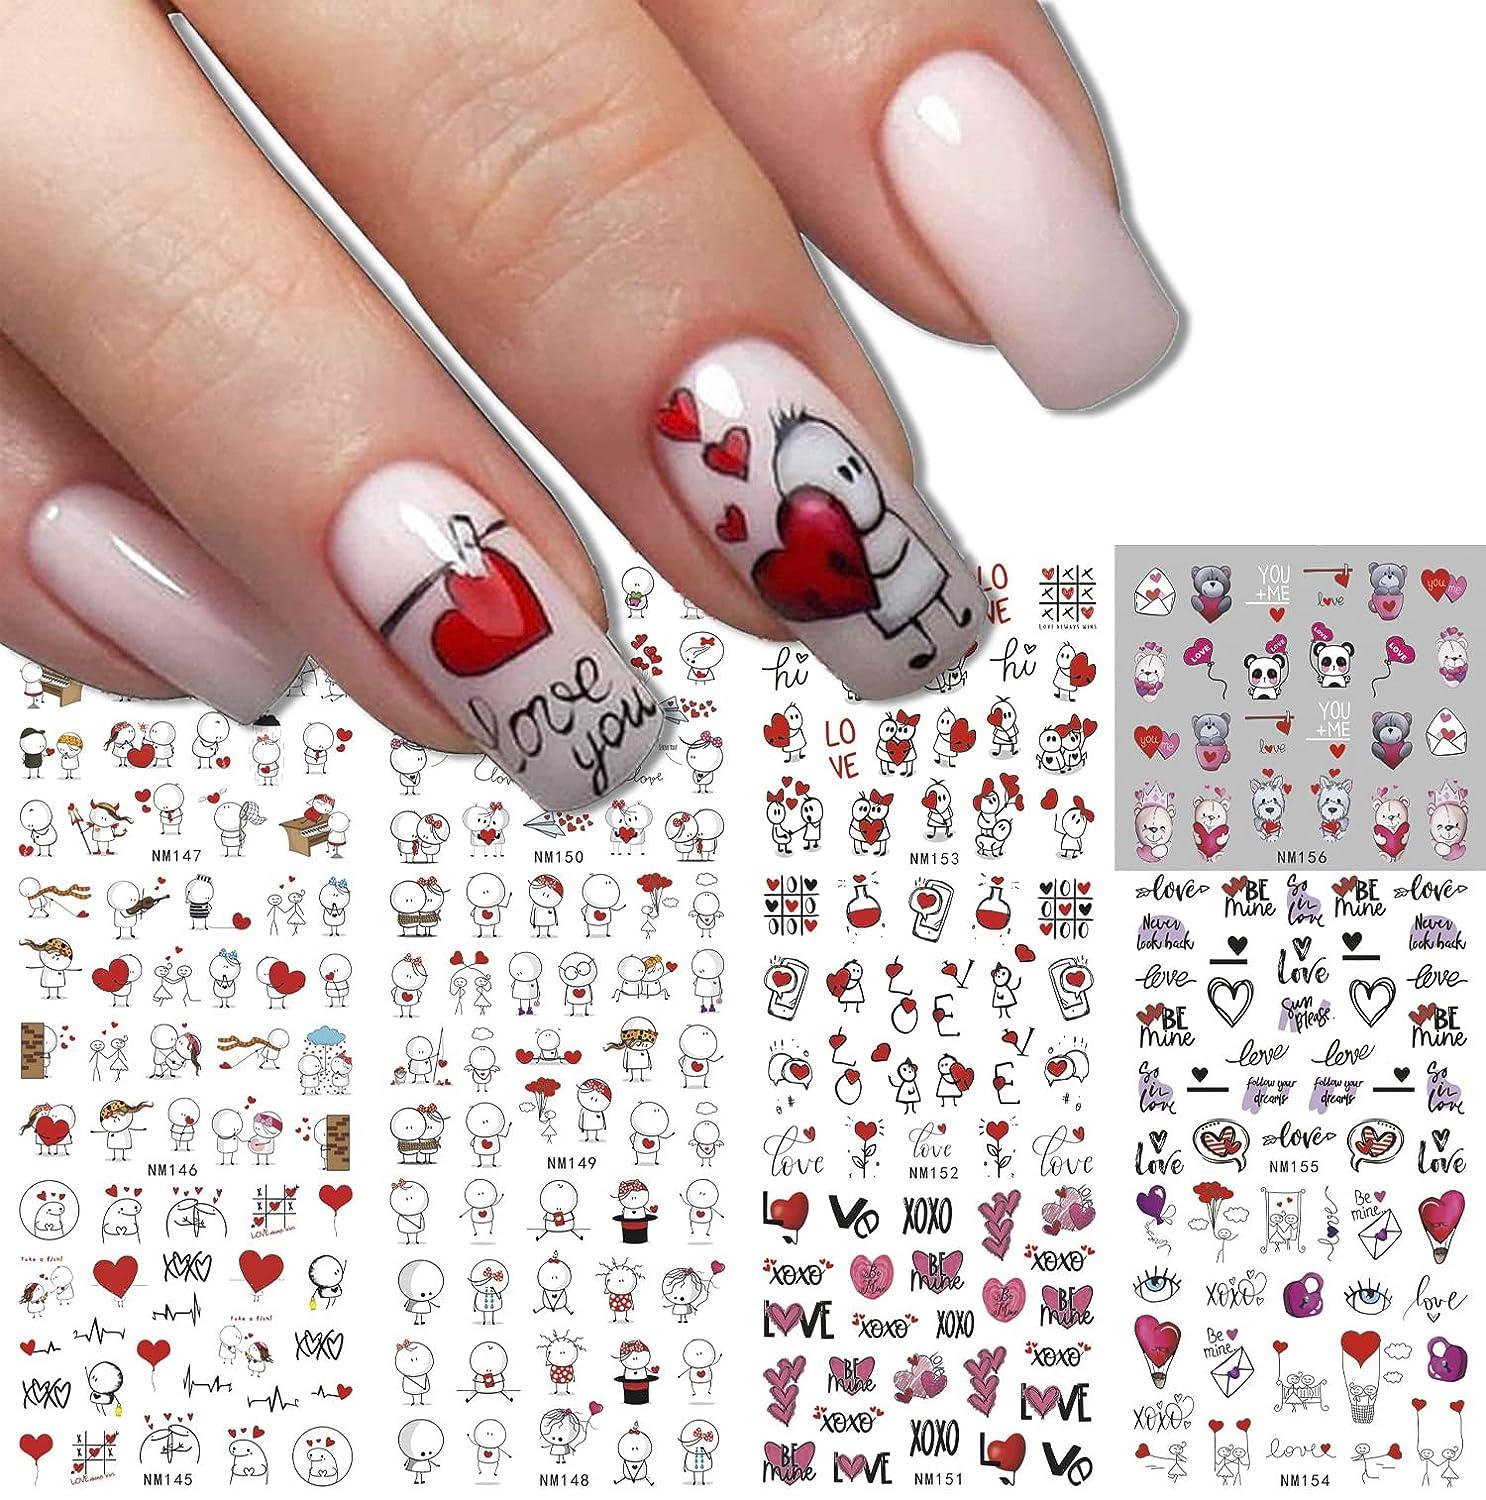 Red Lips Valentine's 3D Nail Charms-10 Pieces